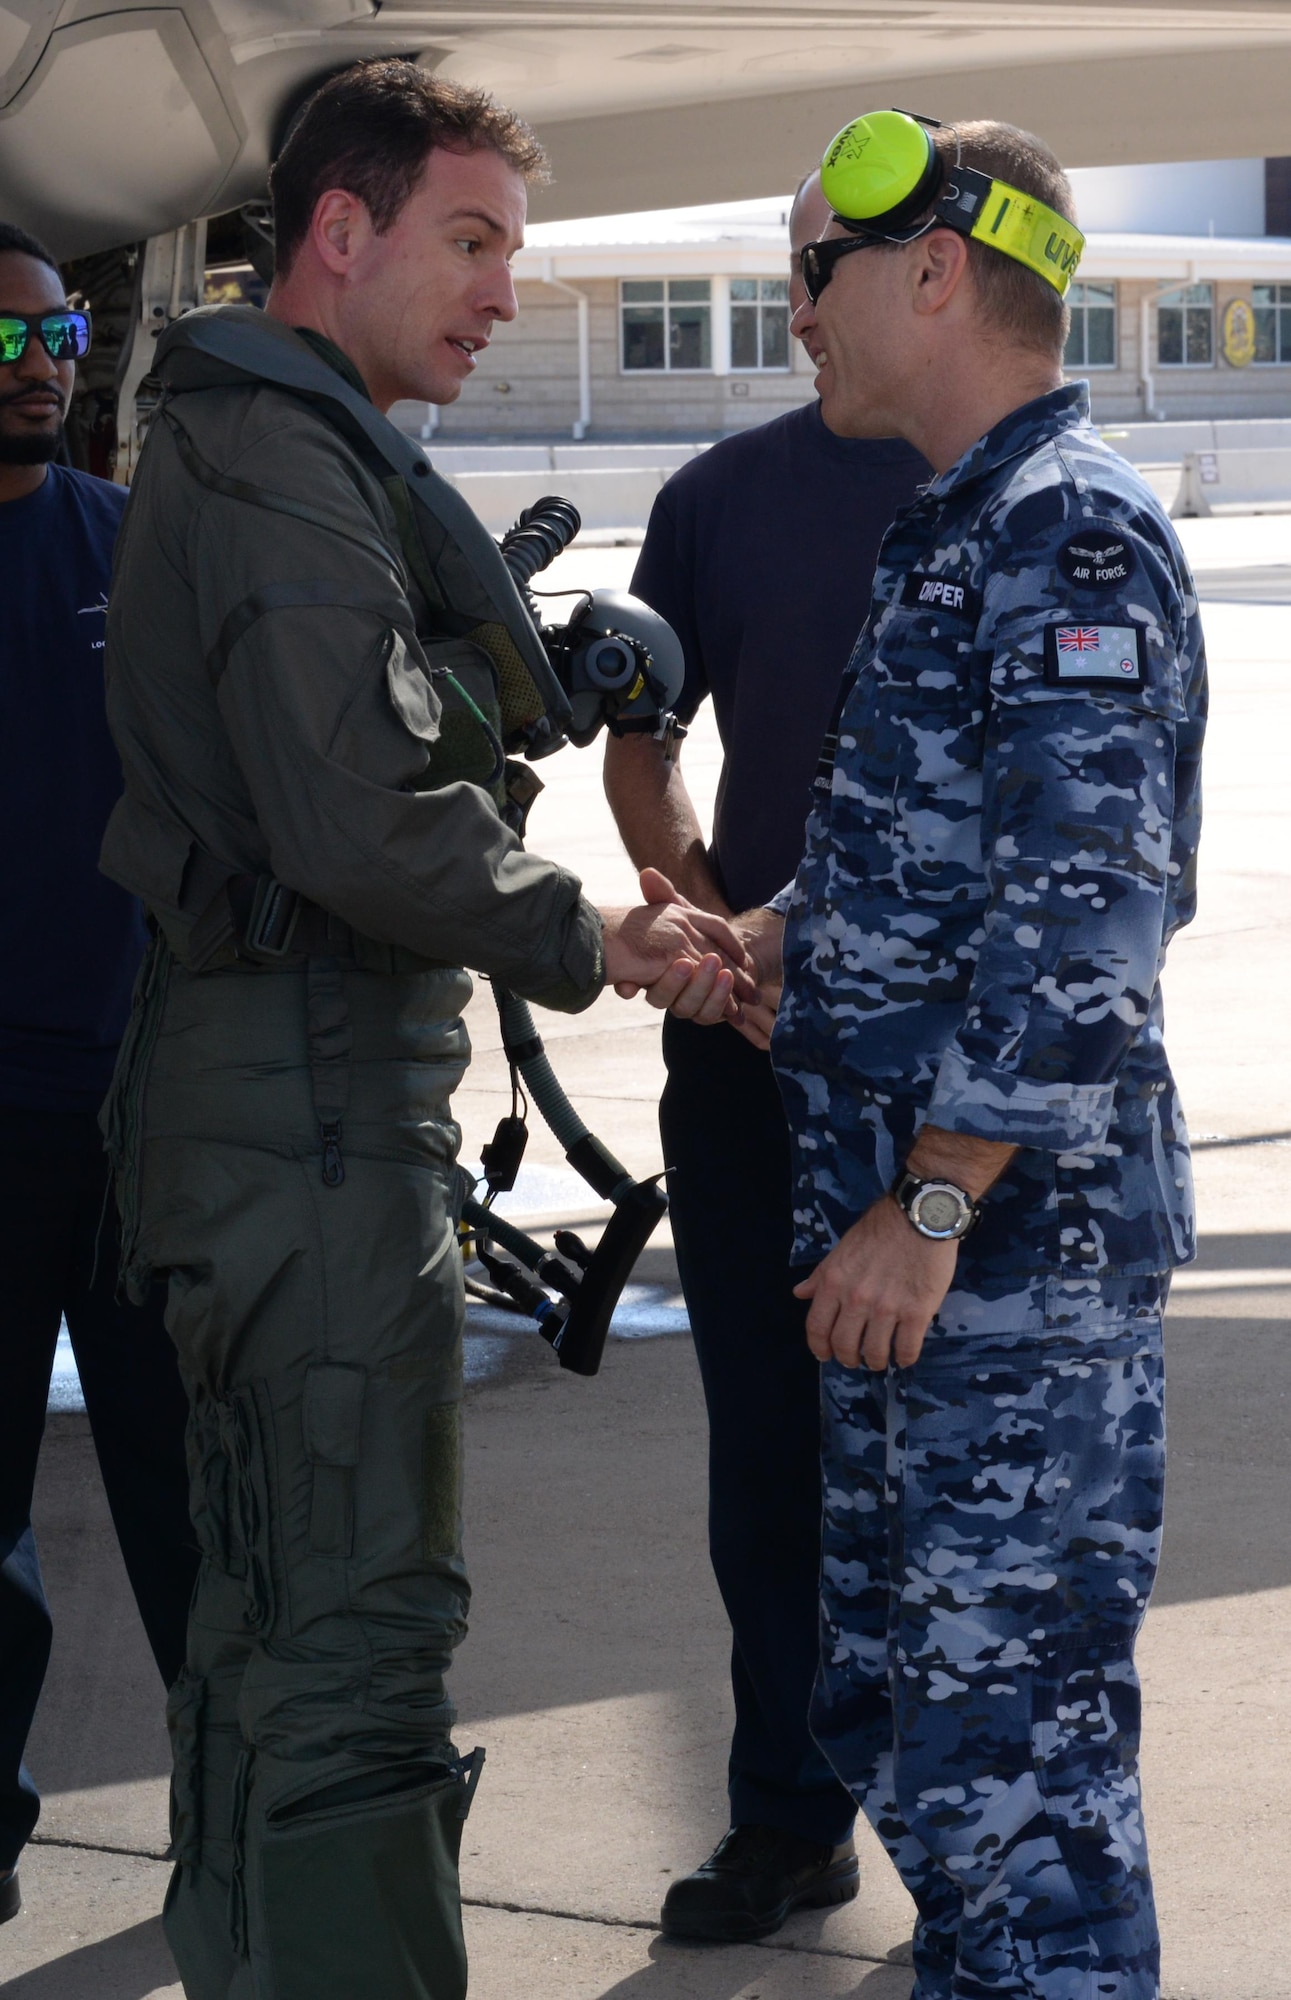 An Italian F-35 Lightning II pilot shakes the hand of Squadron Leader Nathan Draper, an Australian participant maintenance liaison officer, Nov. 5, 2015, at Luke Air Force Base, Ariz., after flying the first Italian F-35 training mission. (U.S. Air Force photo/Airman 1st Class Ridge Shan) 